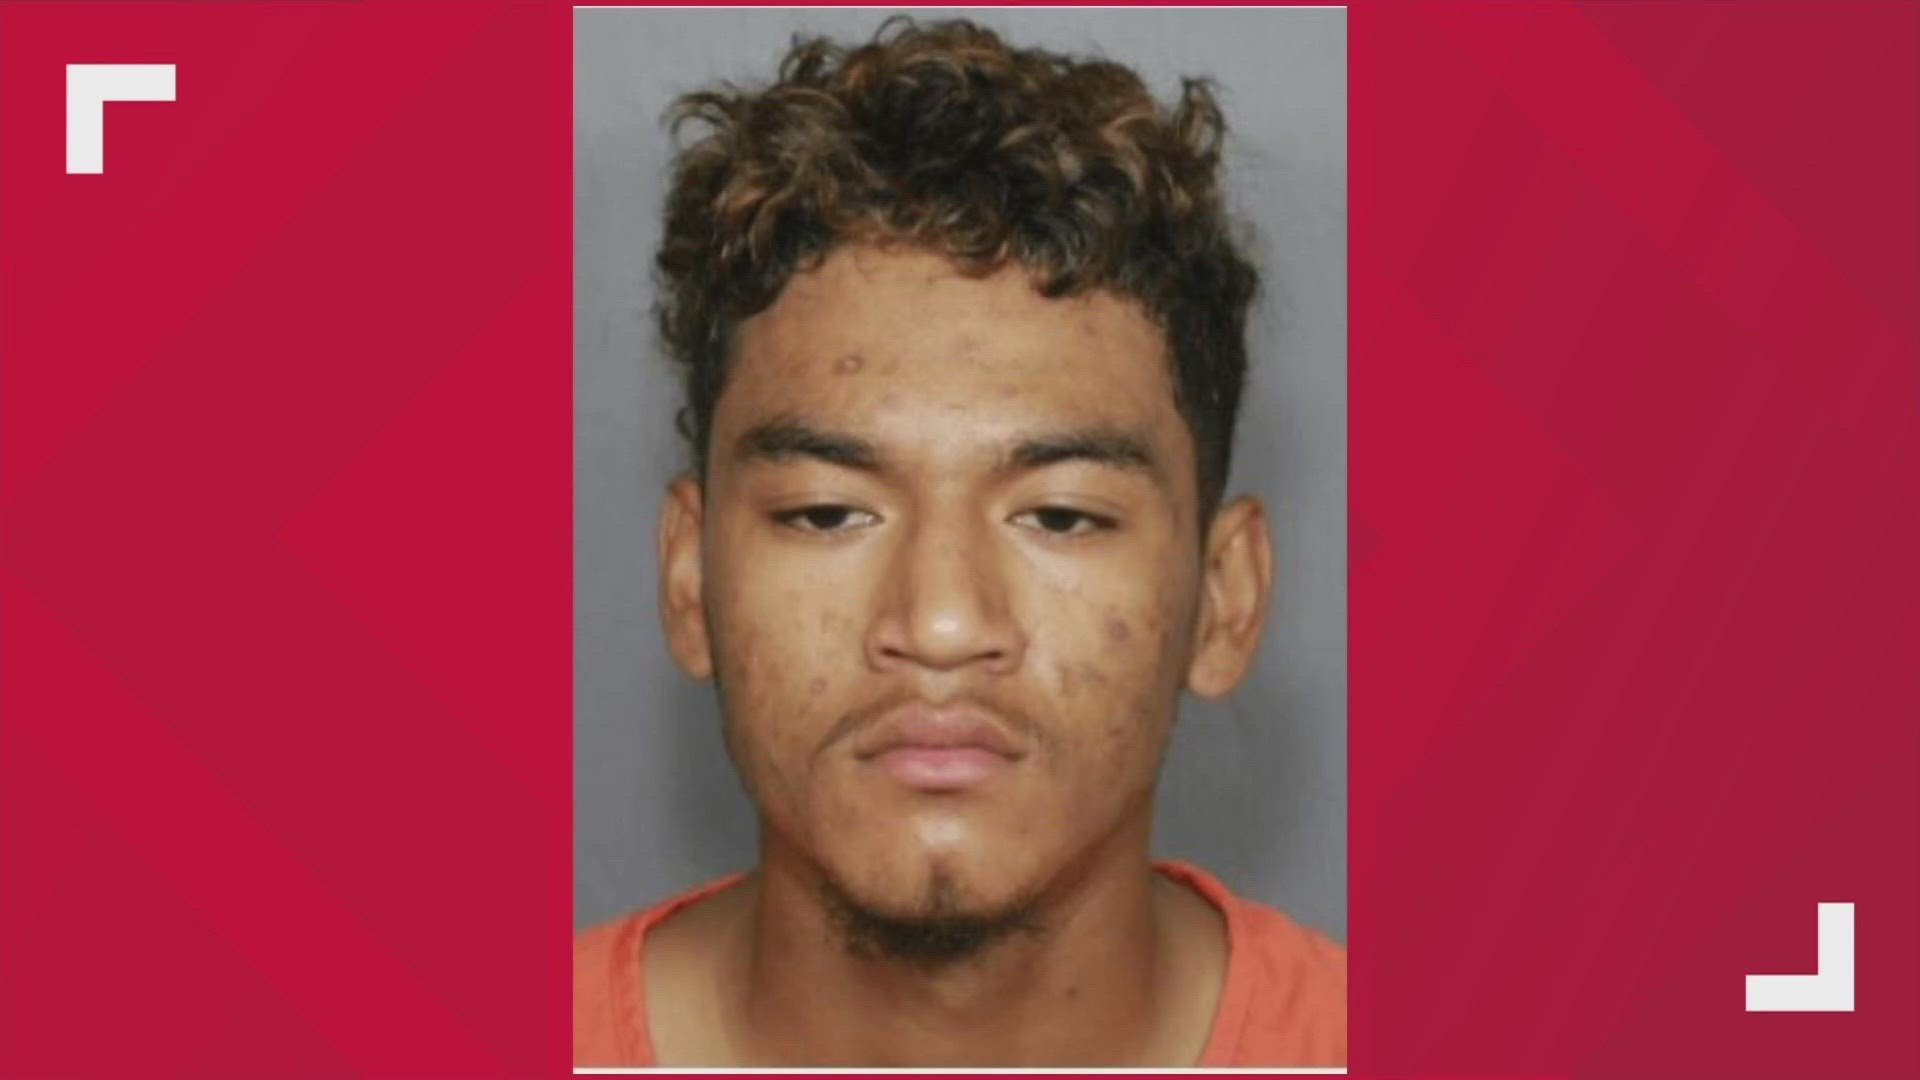 Brighton Police is asking people for help in finding Luis Antonio Hernandez, 20, accused of robbing and assaulting a 77-year-old ice cream truck driver in August.